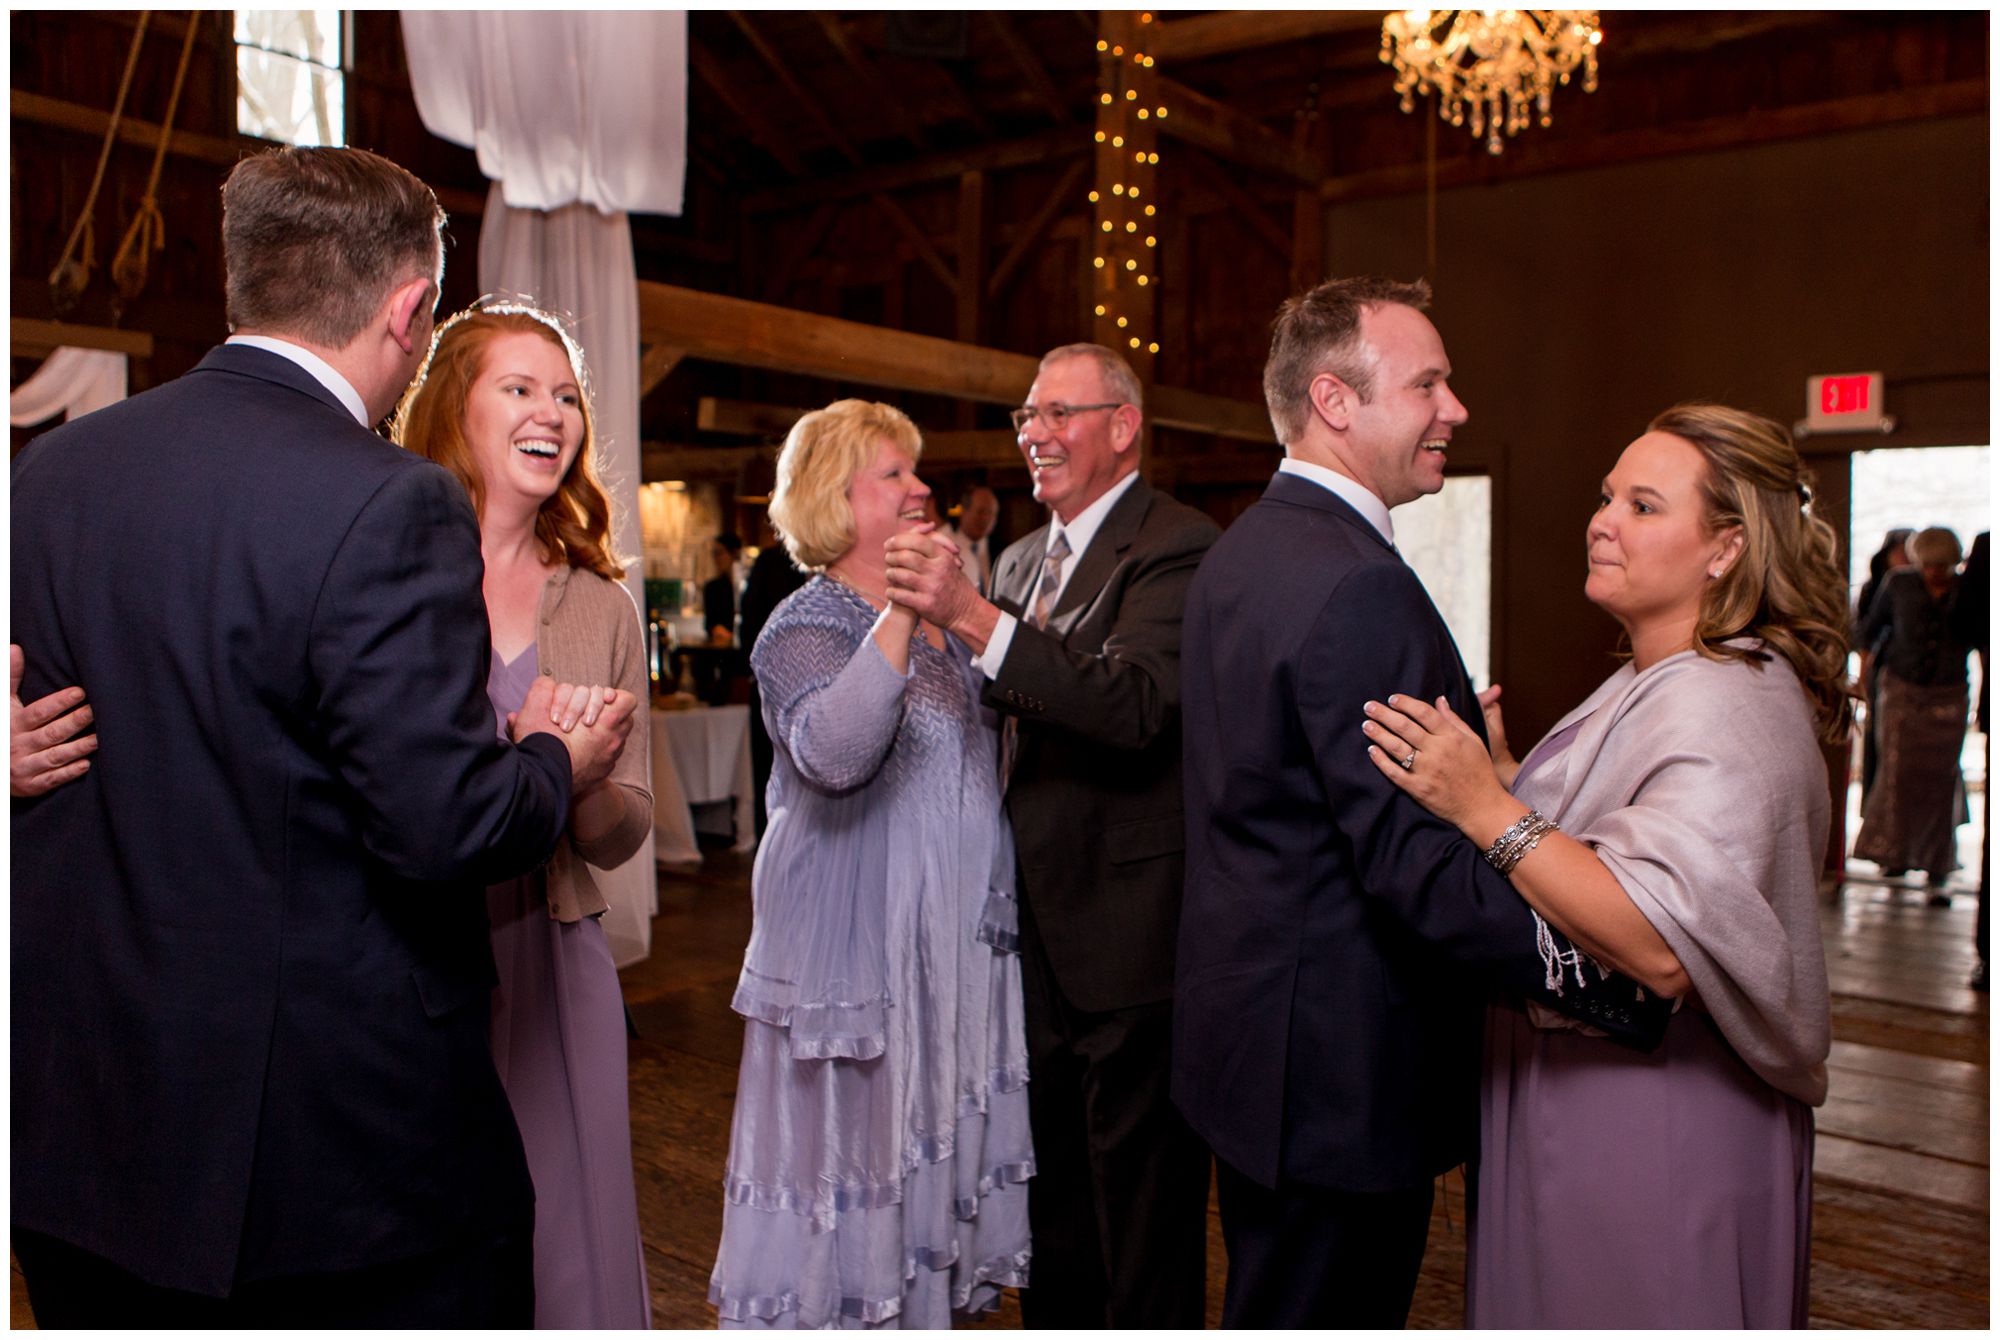 guests dance during wedding reception at Mustard Seed Gardens in Noblesville Indiana